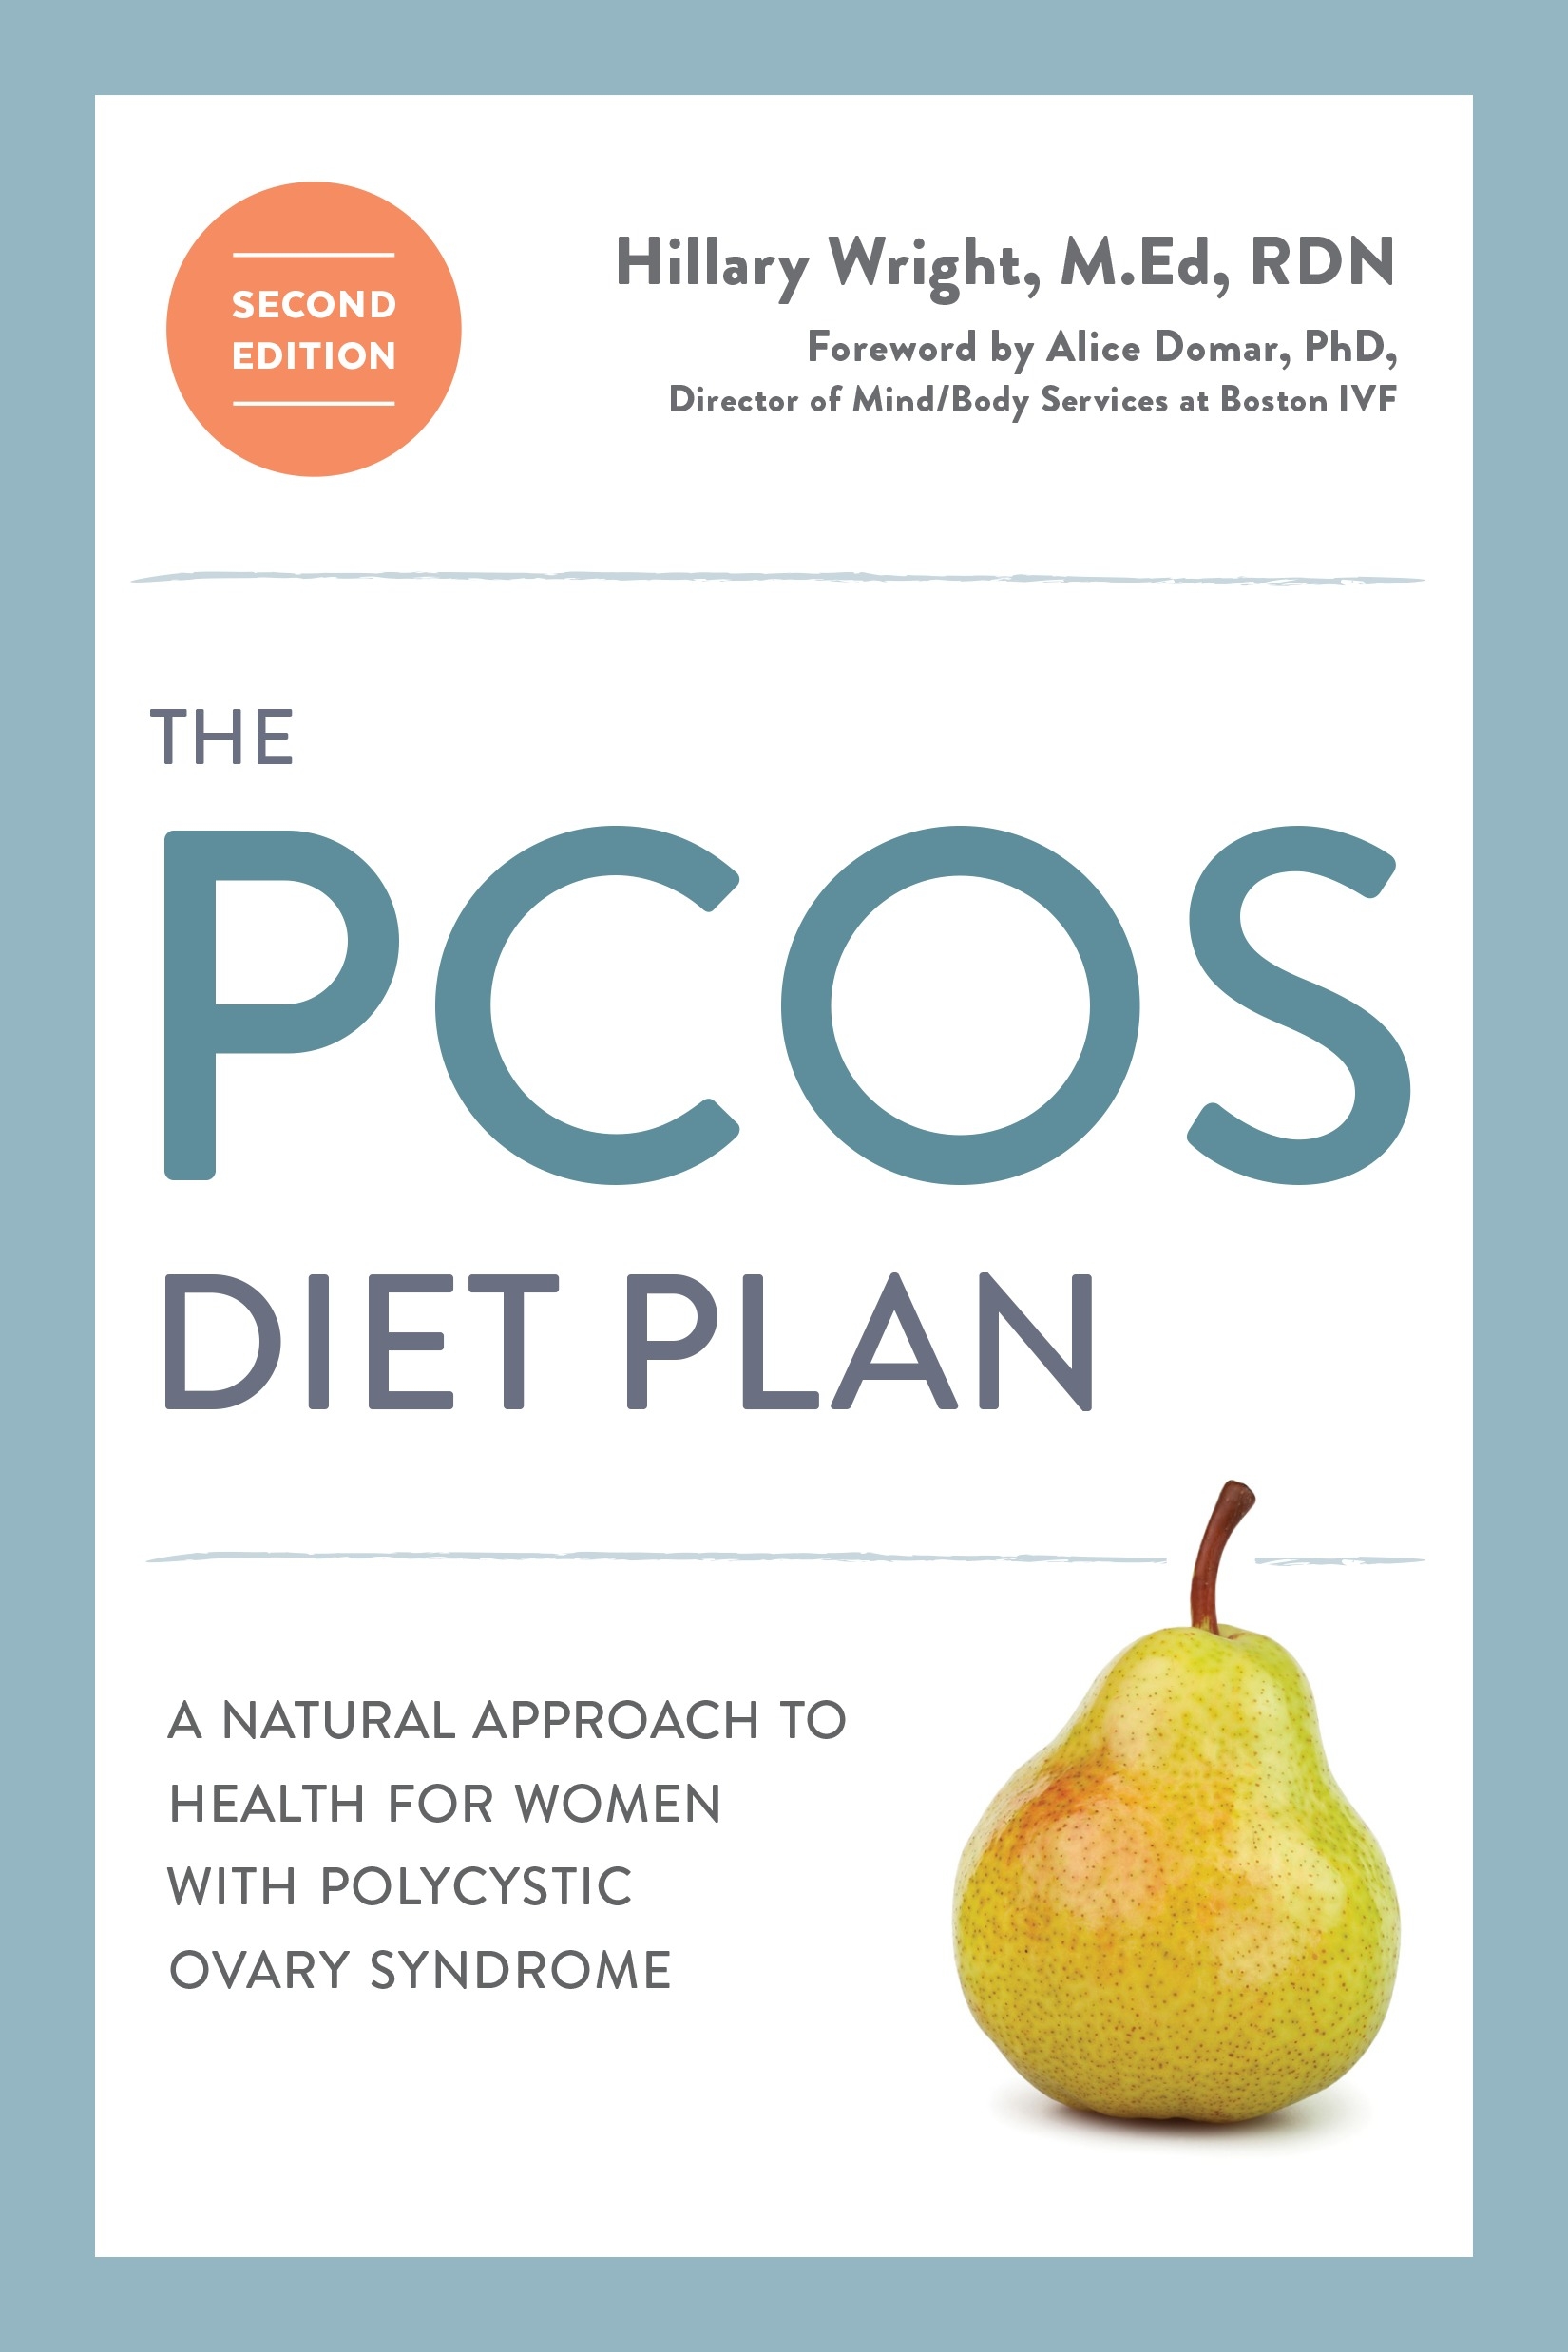 Printable Pcos Diet Chart Web Adding The Following Foods To Your Diet Will Help You Lose Weight